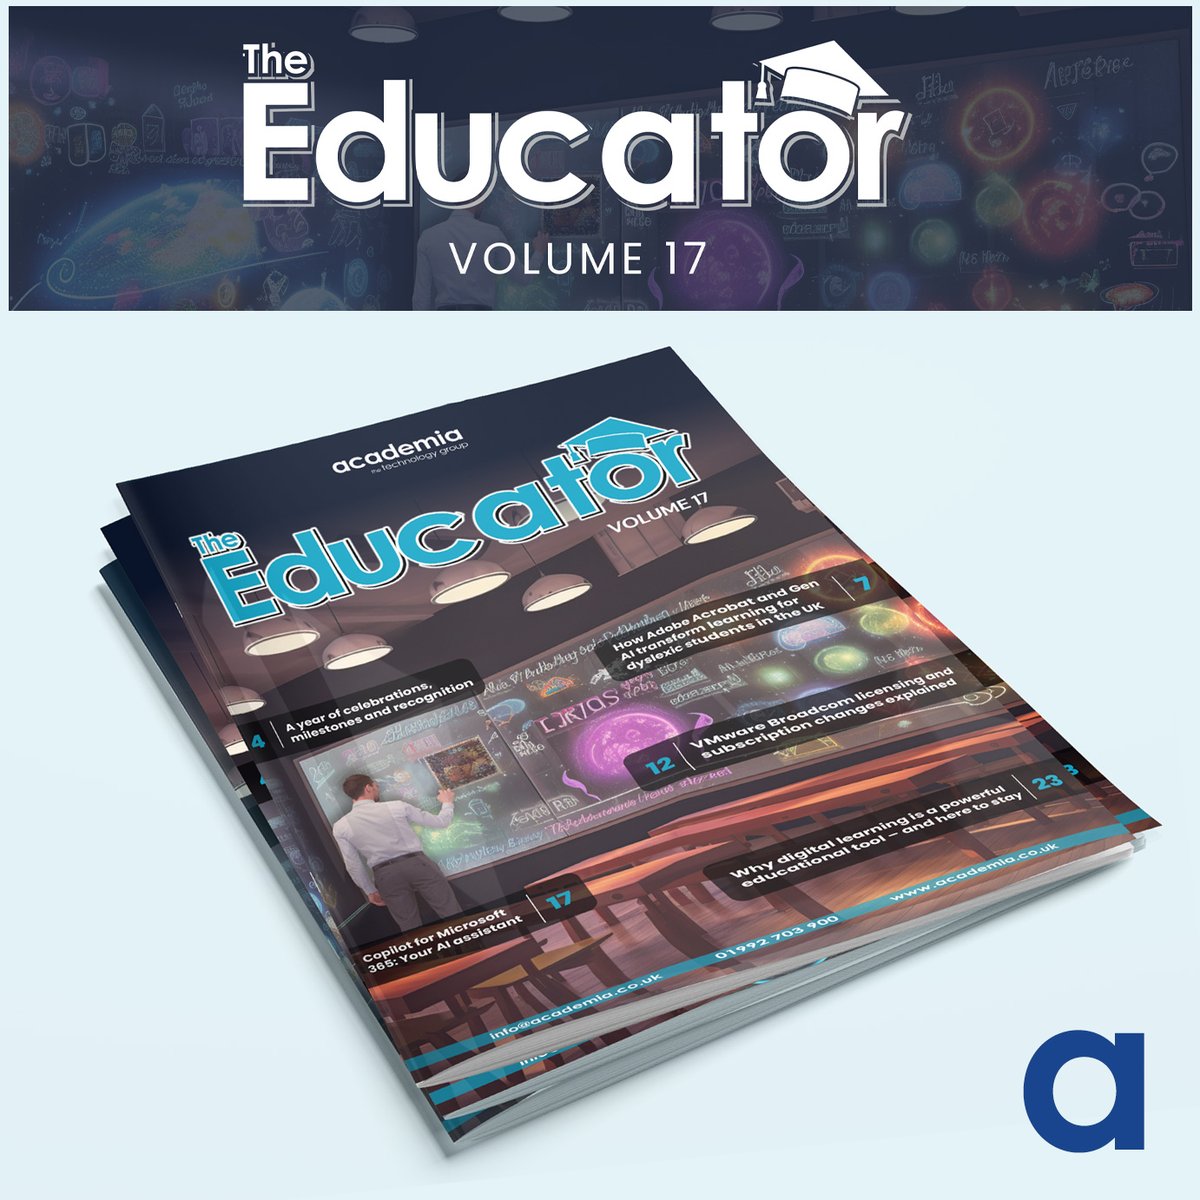 📣 The Educator Volume 17 is here! It's filled with plenty of great content from the Academia team and our strategic vendor partners to help you plan for getting the most from your technology. Download your free copy now 👉 ow.ly/PvHV50Ro2Cl #TheEducator #EduTech